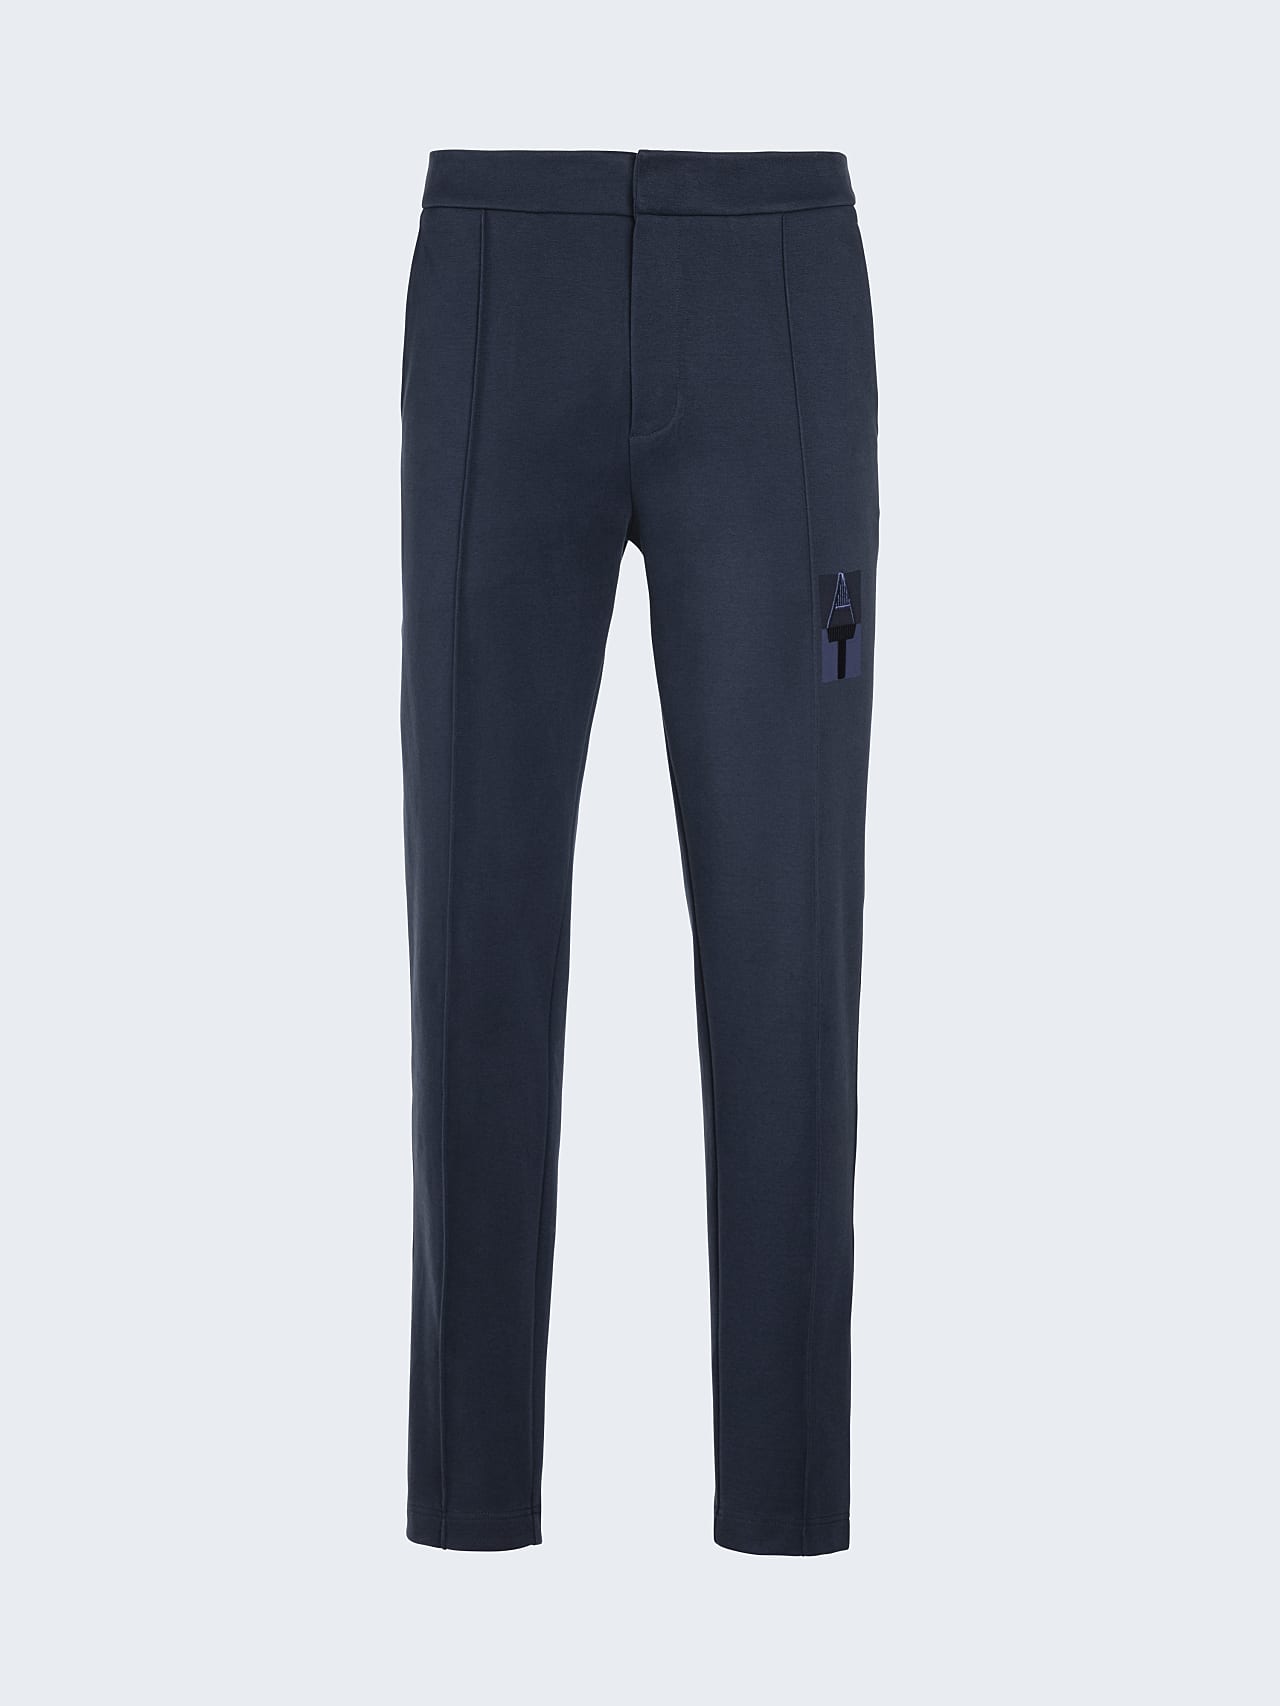 AlphaTauri | PRYK V8.Y6.01 | Sweatpants with Logo Embroidery in navy for Men